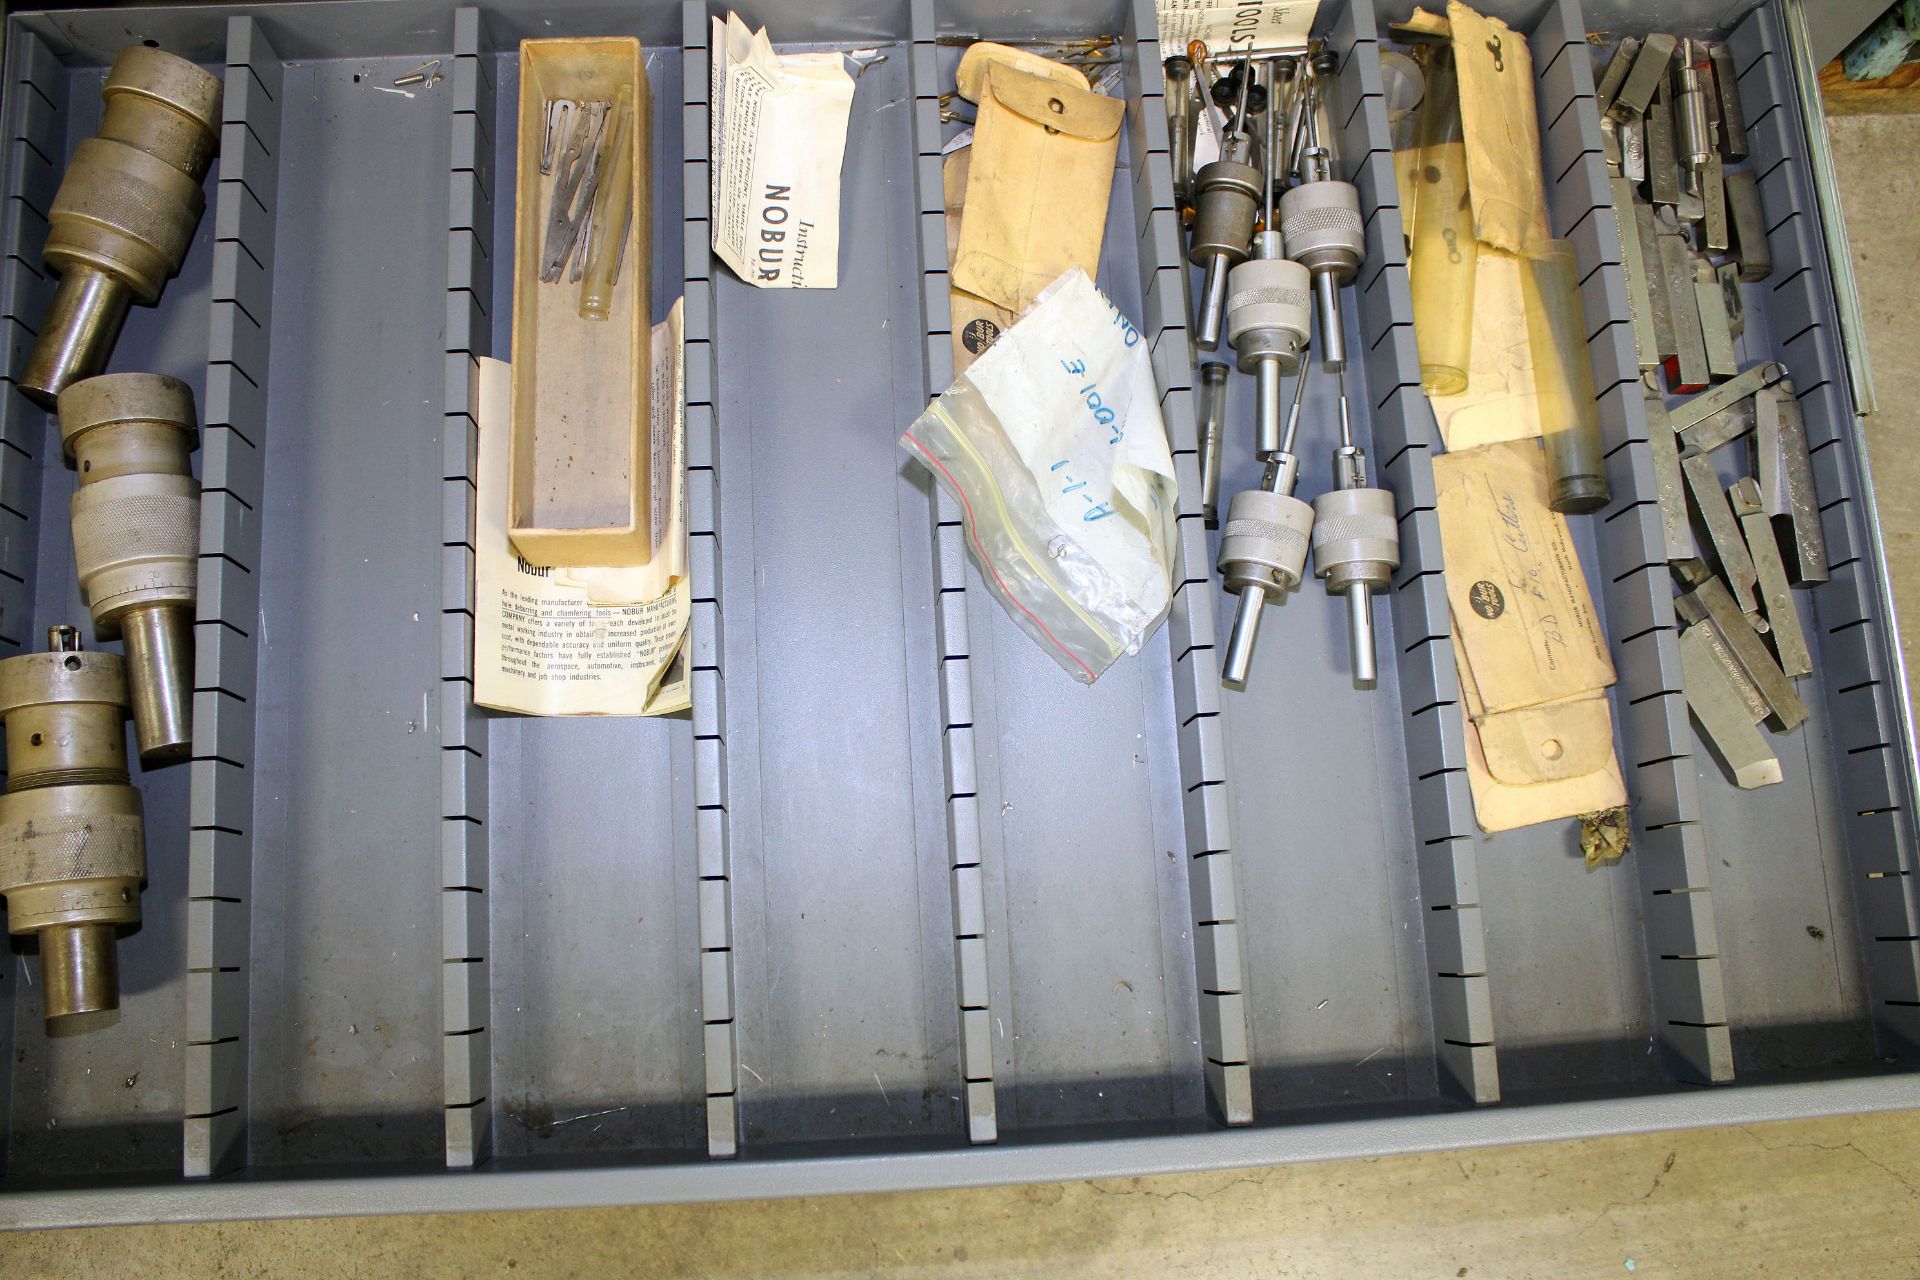 CABINET, HUOT, 15 DRAWER, 19" X 34" X 37" HEIGHT, WITH CONTENTS, CENTER DRILLS , JACOBES CHUCK KEYS, - Image 12 of 12